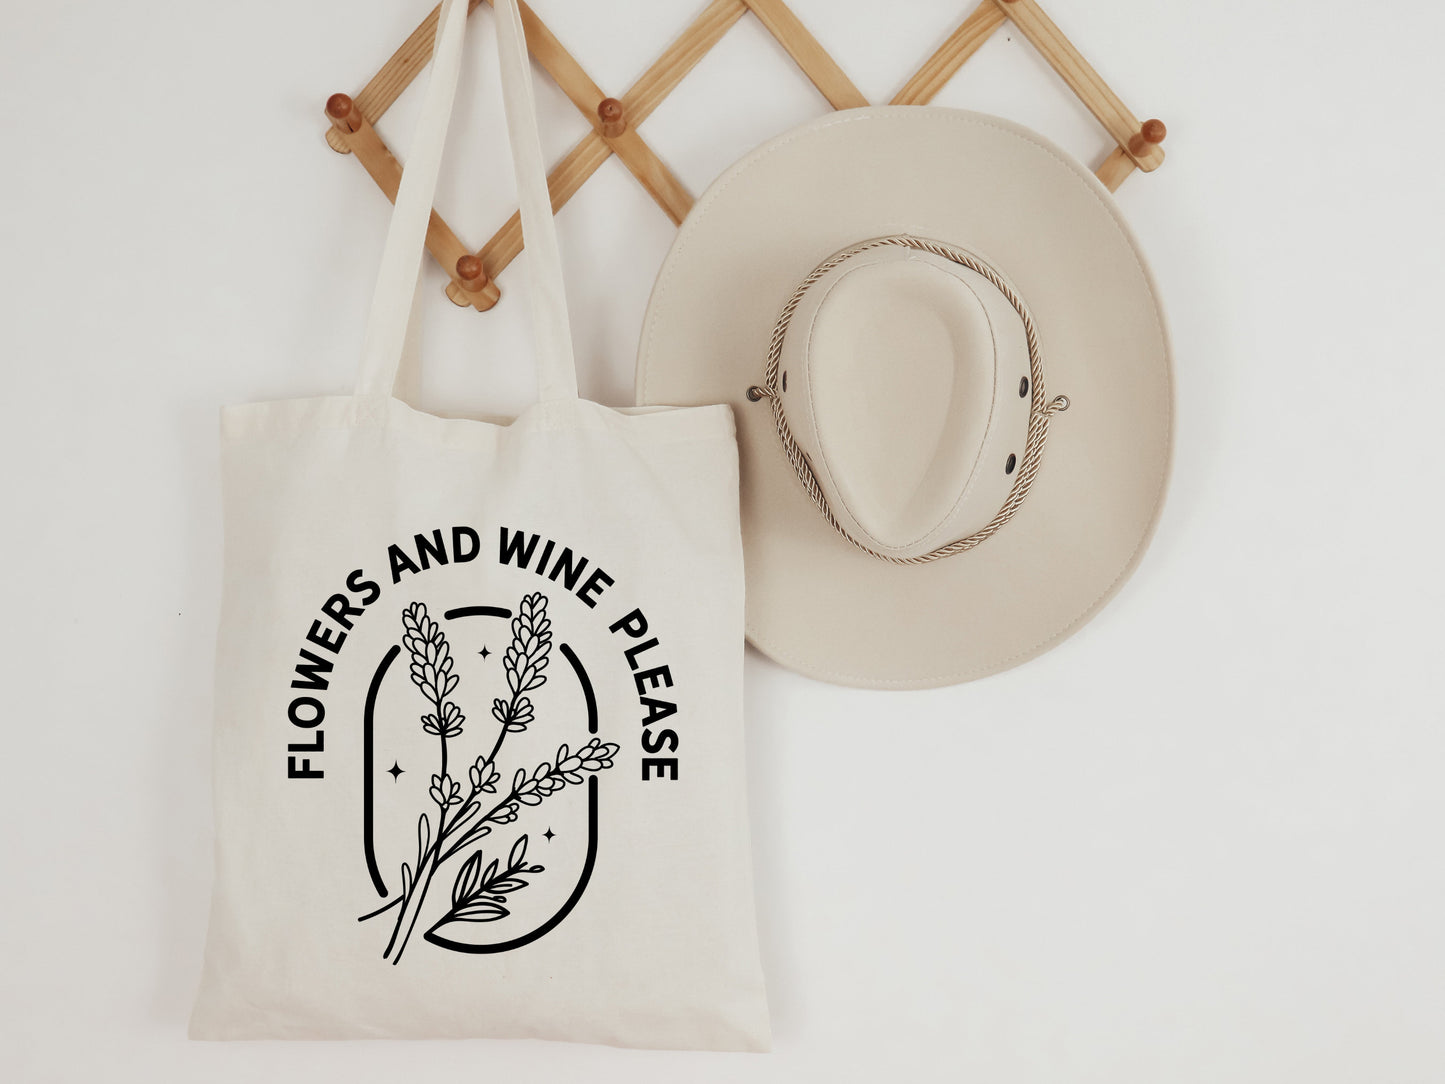 flowers and wine please tote bag, gifts for best friends, reusable bag, gifts for plant lover, wine gifts, flower tote bag, christmas gifts